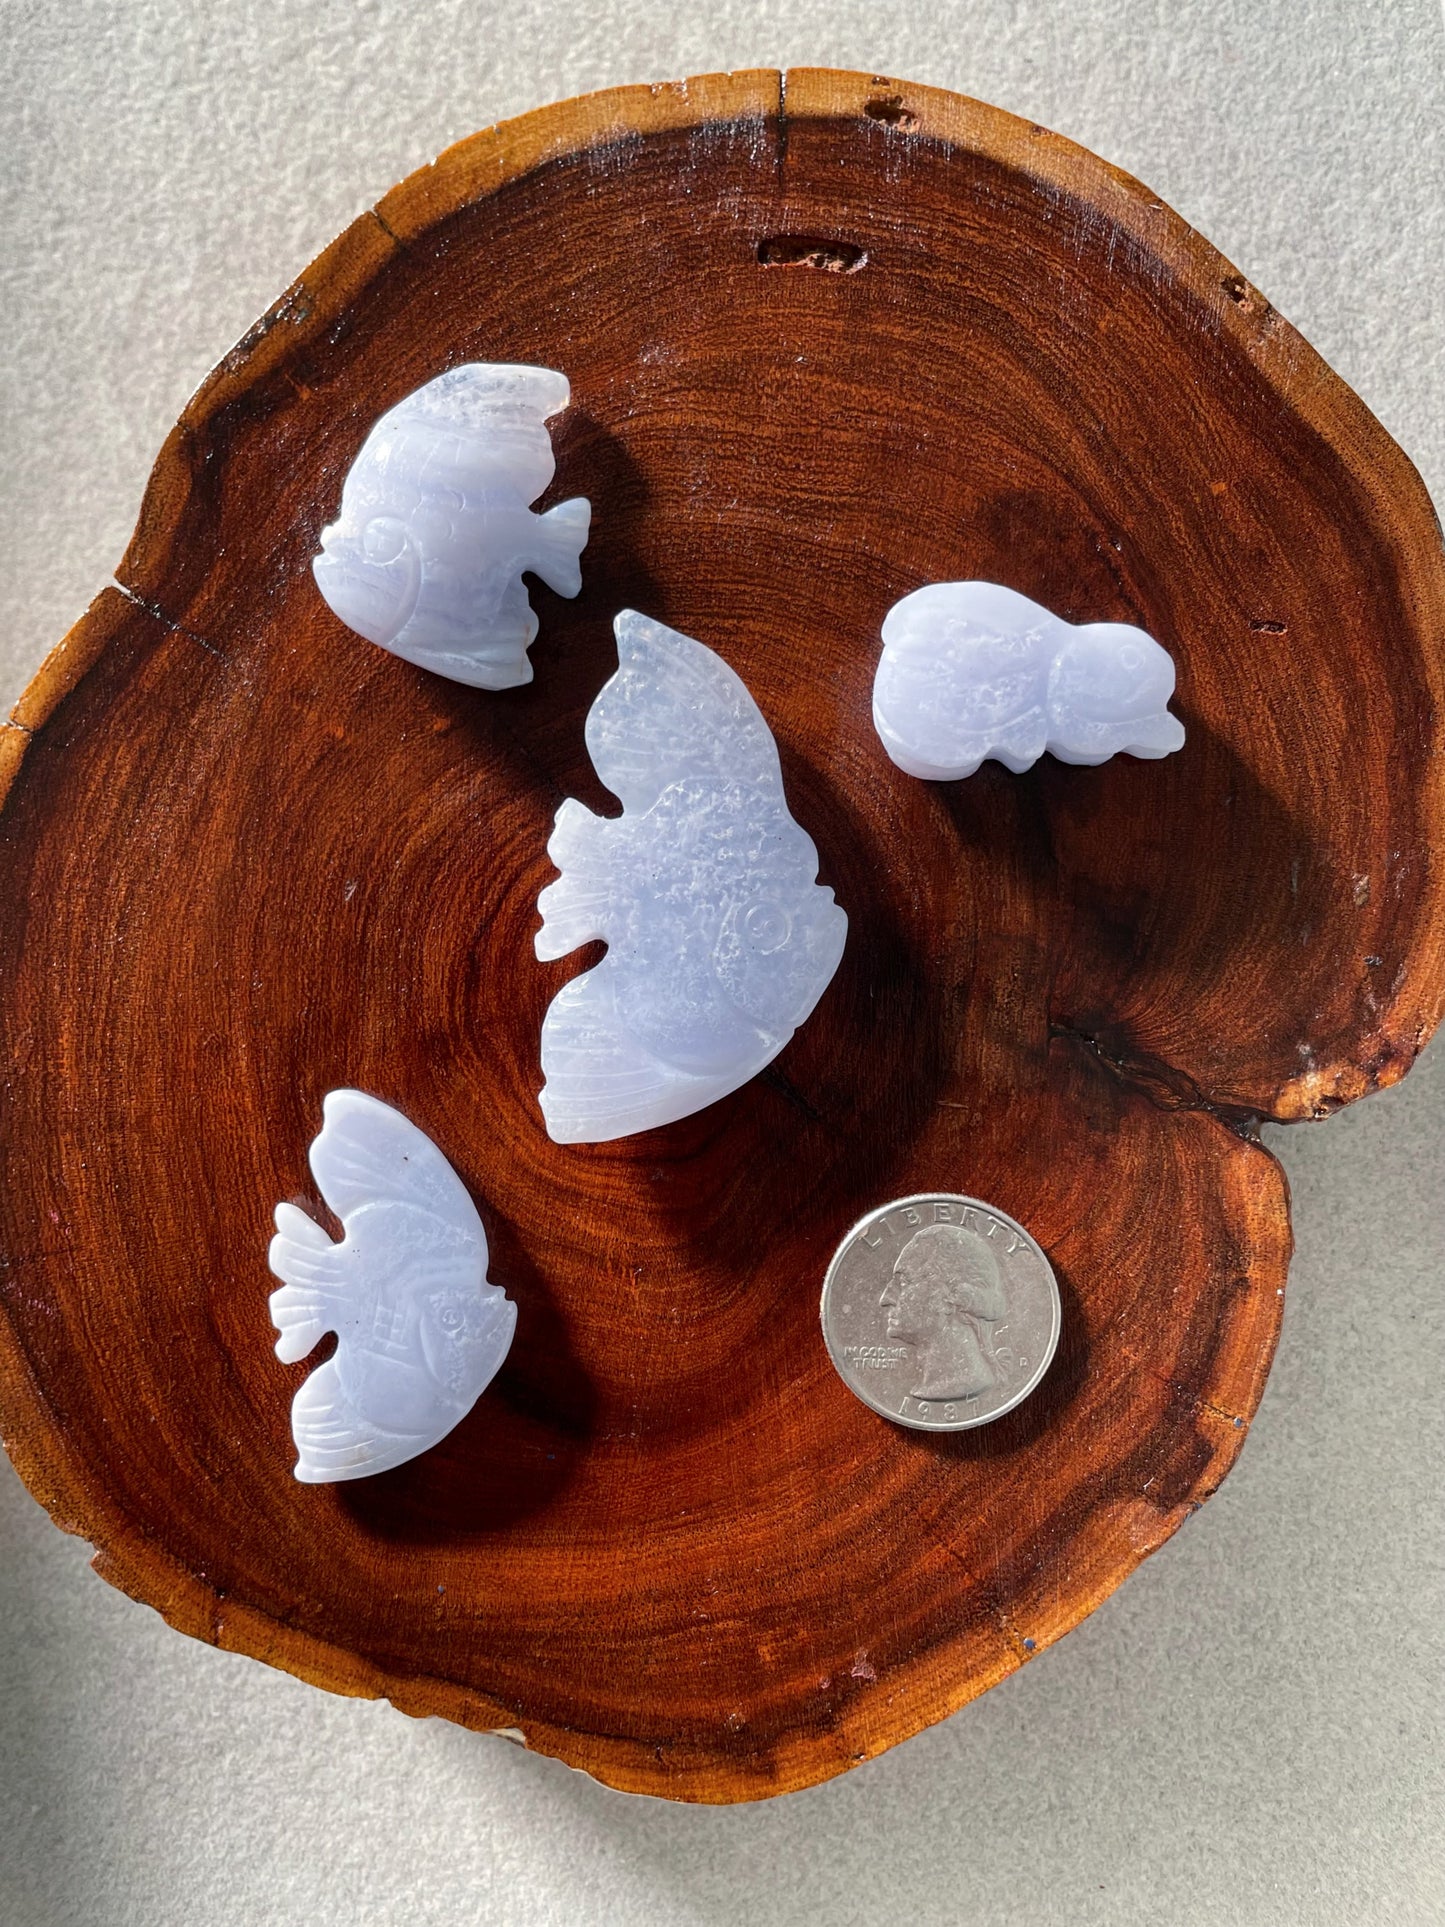 Rare Find! Lace Blue Agate Animal Carving 4pc Set - 3x Angelfish + Bunny / Exclusive Rare Find Angelfish with Druzy / Blk Swn Krystalz ($100)